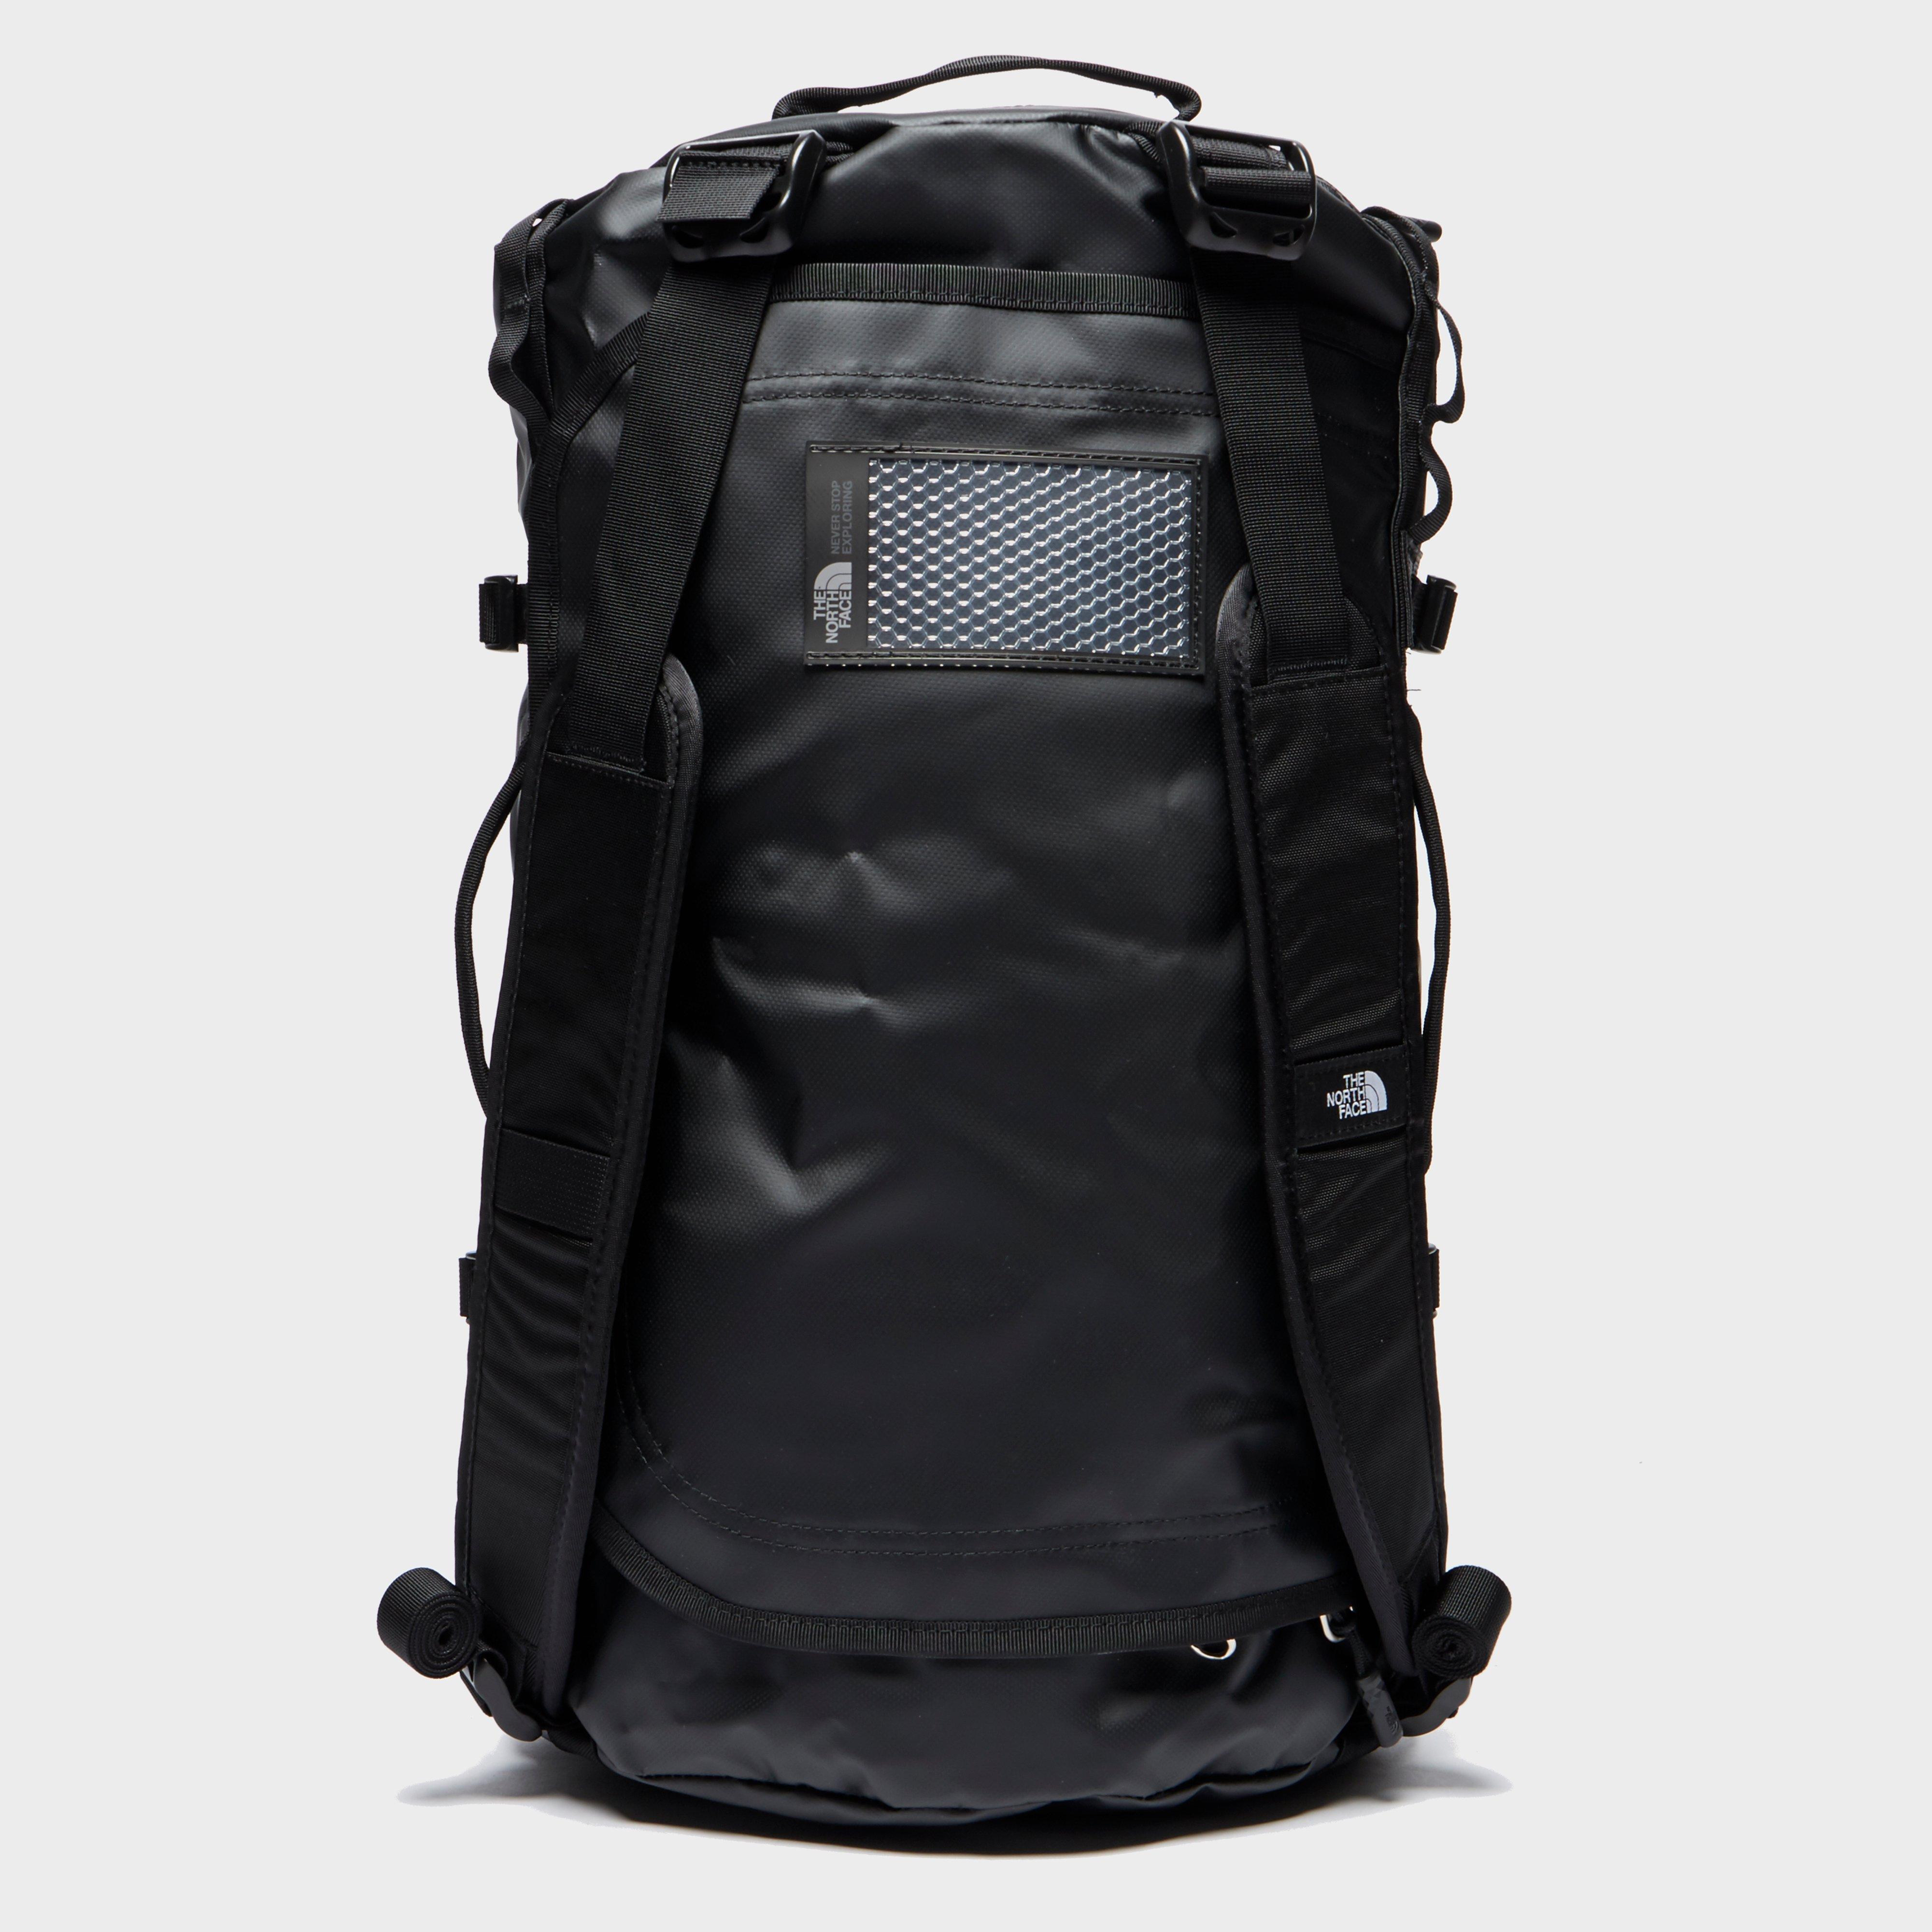 the north face bag small